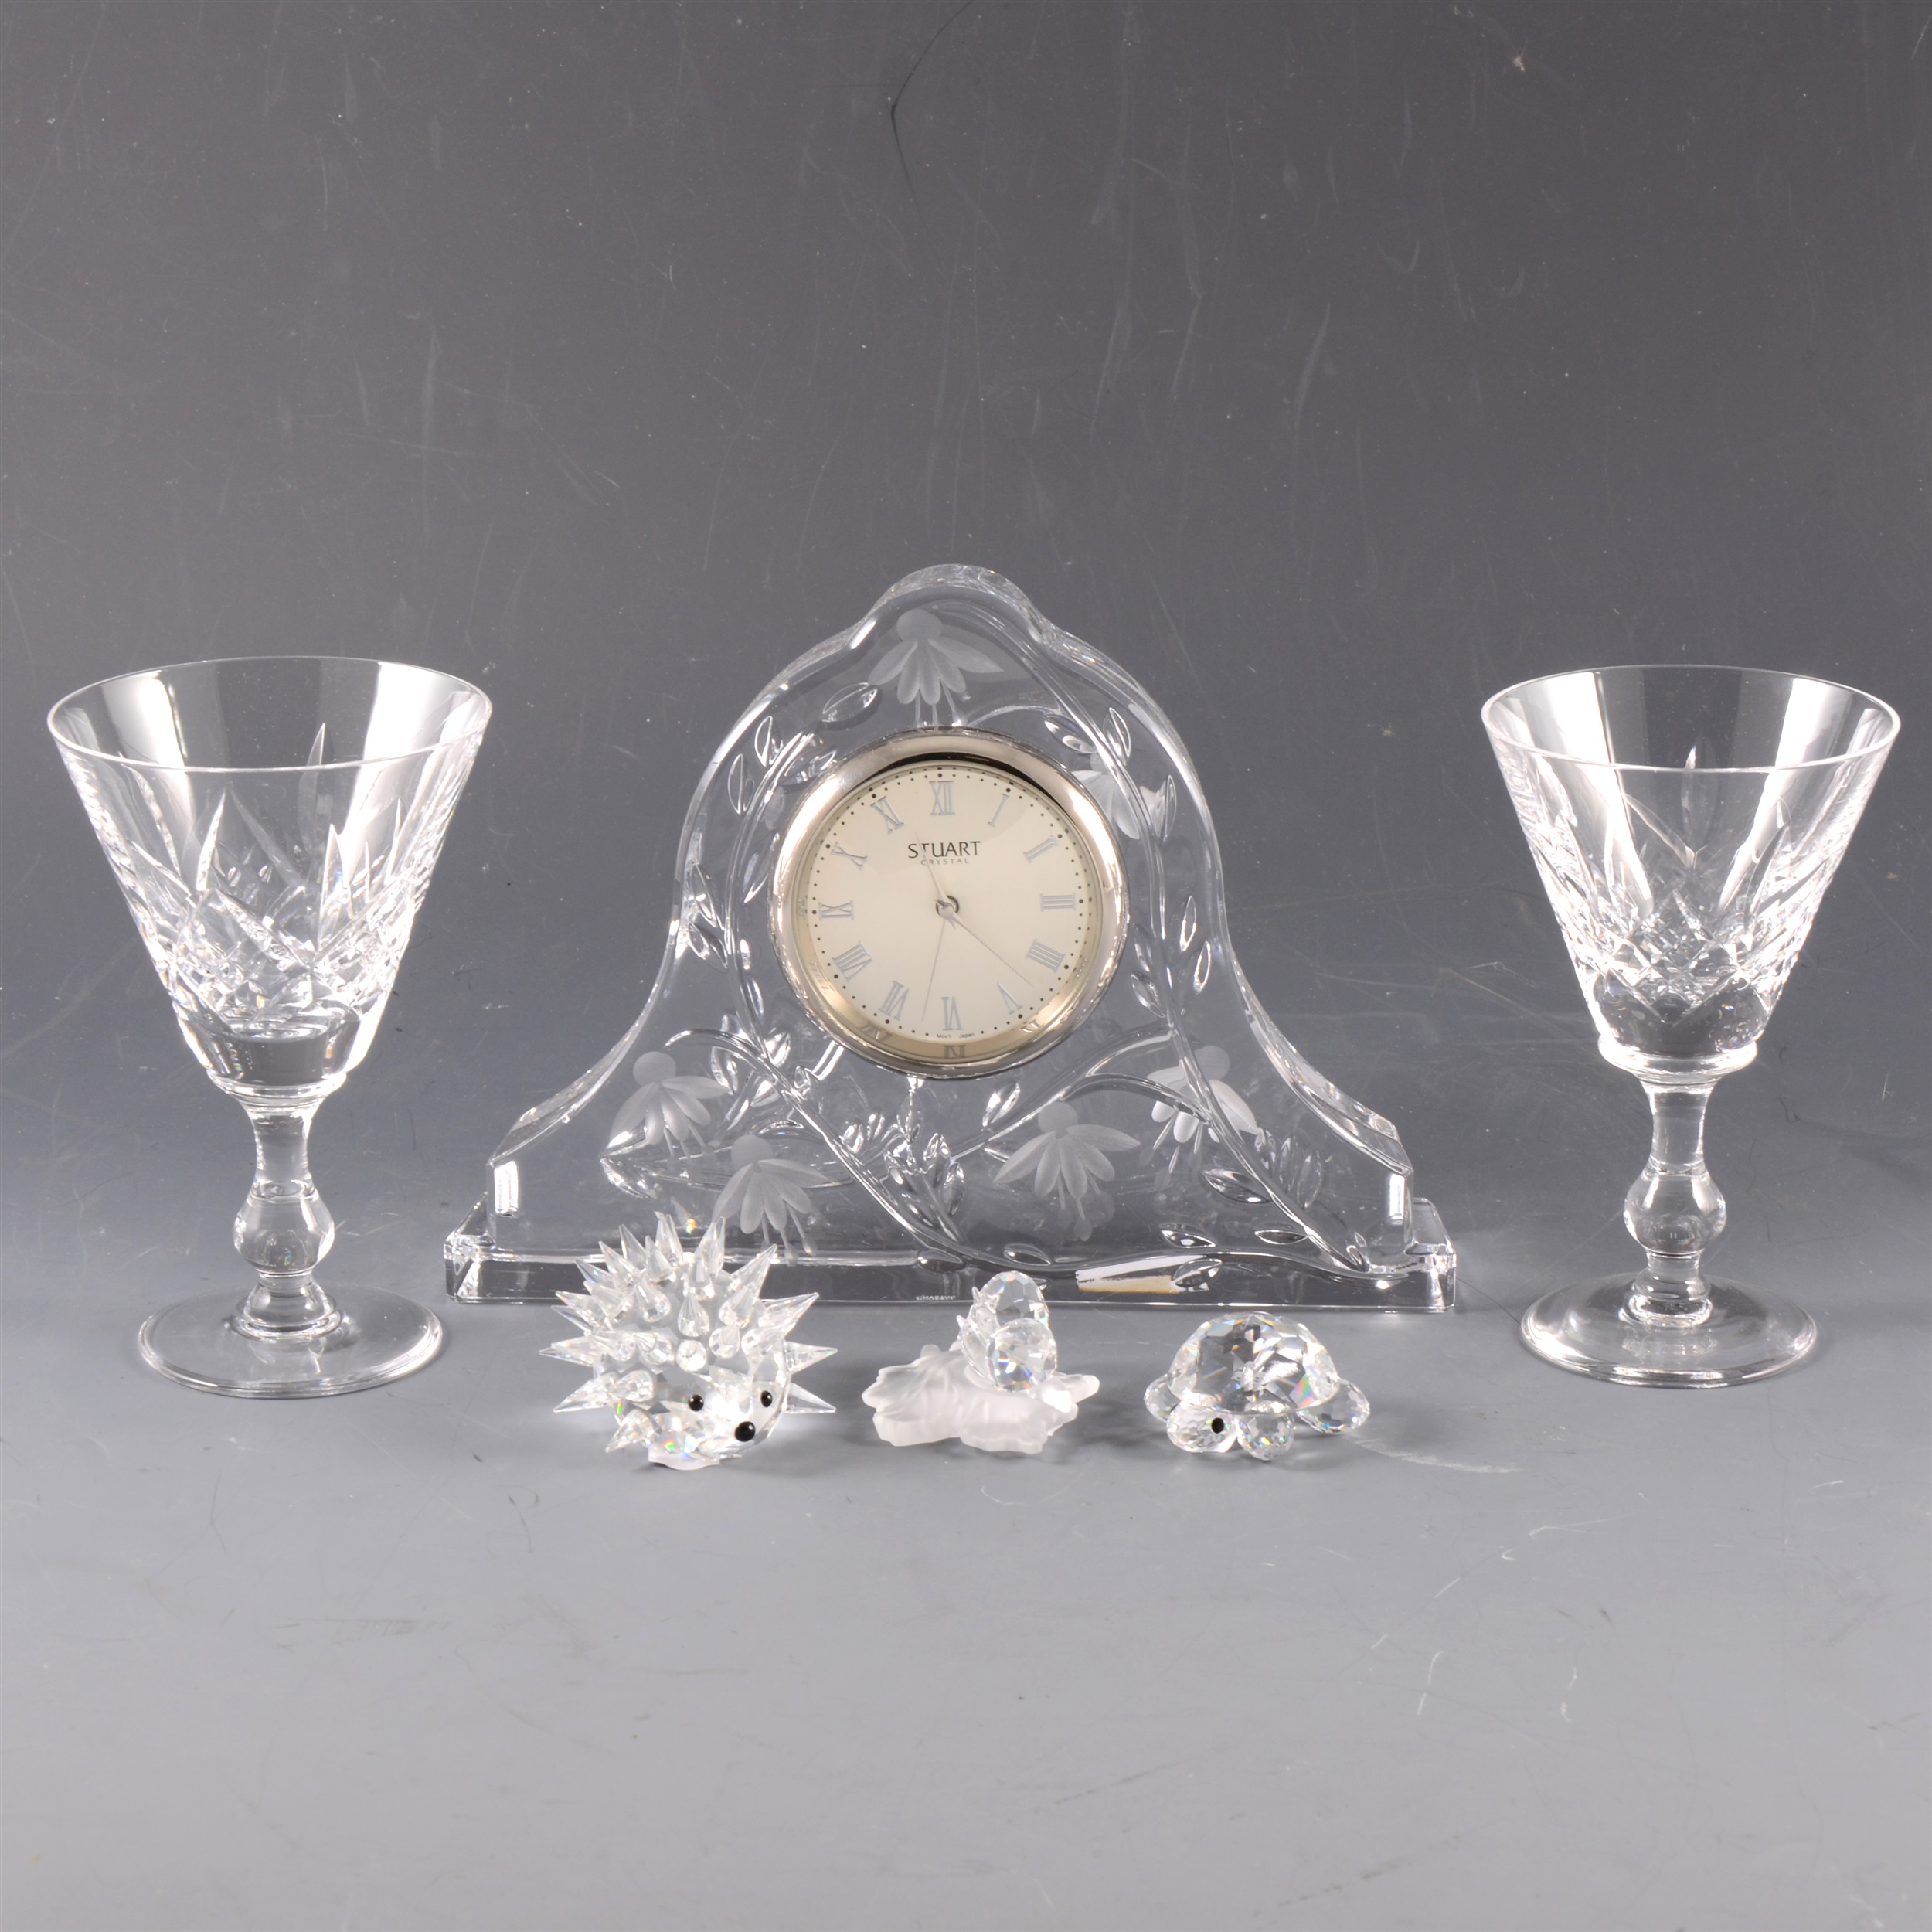 A collection of glassware, including Waterford Crystal clock, Stuart Crystal clock and Swarovski